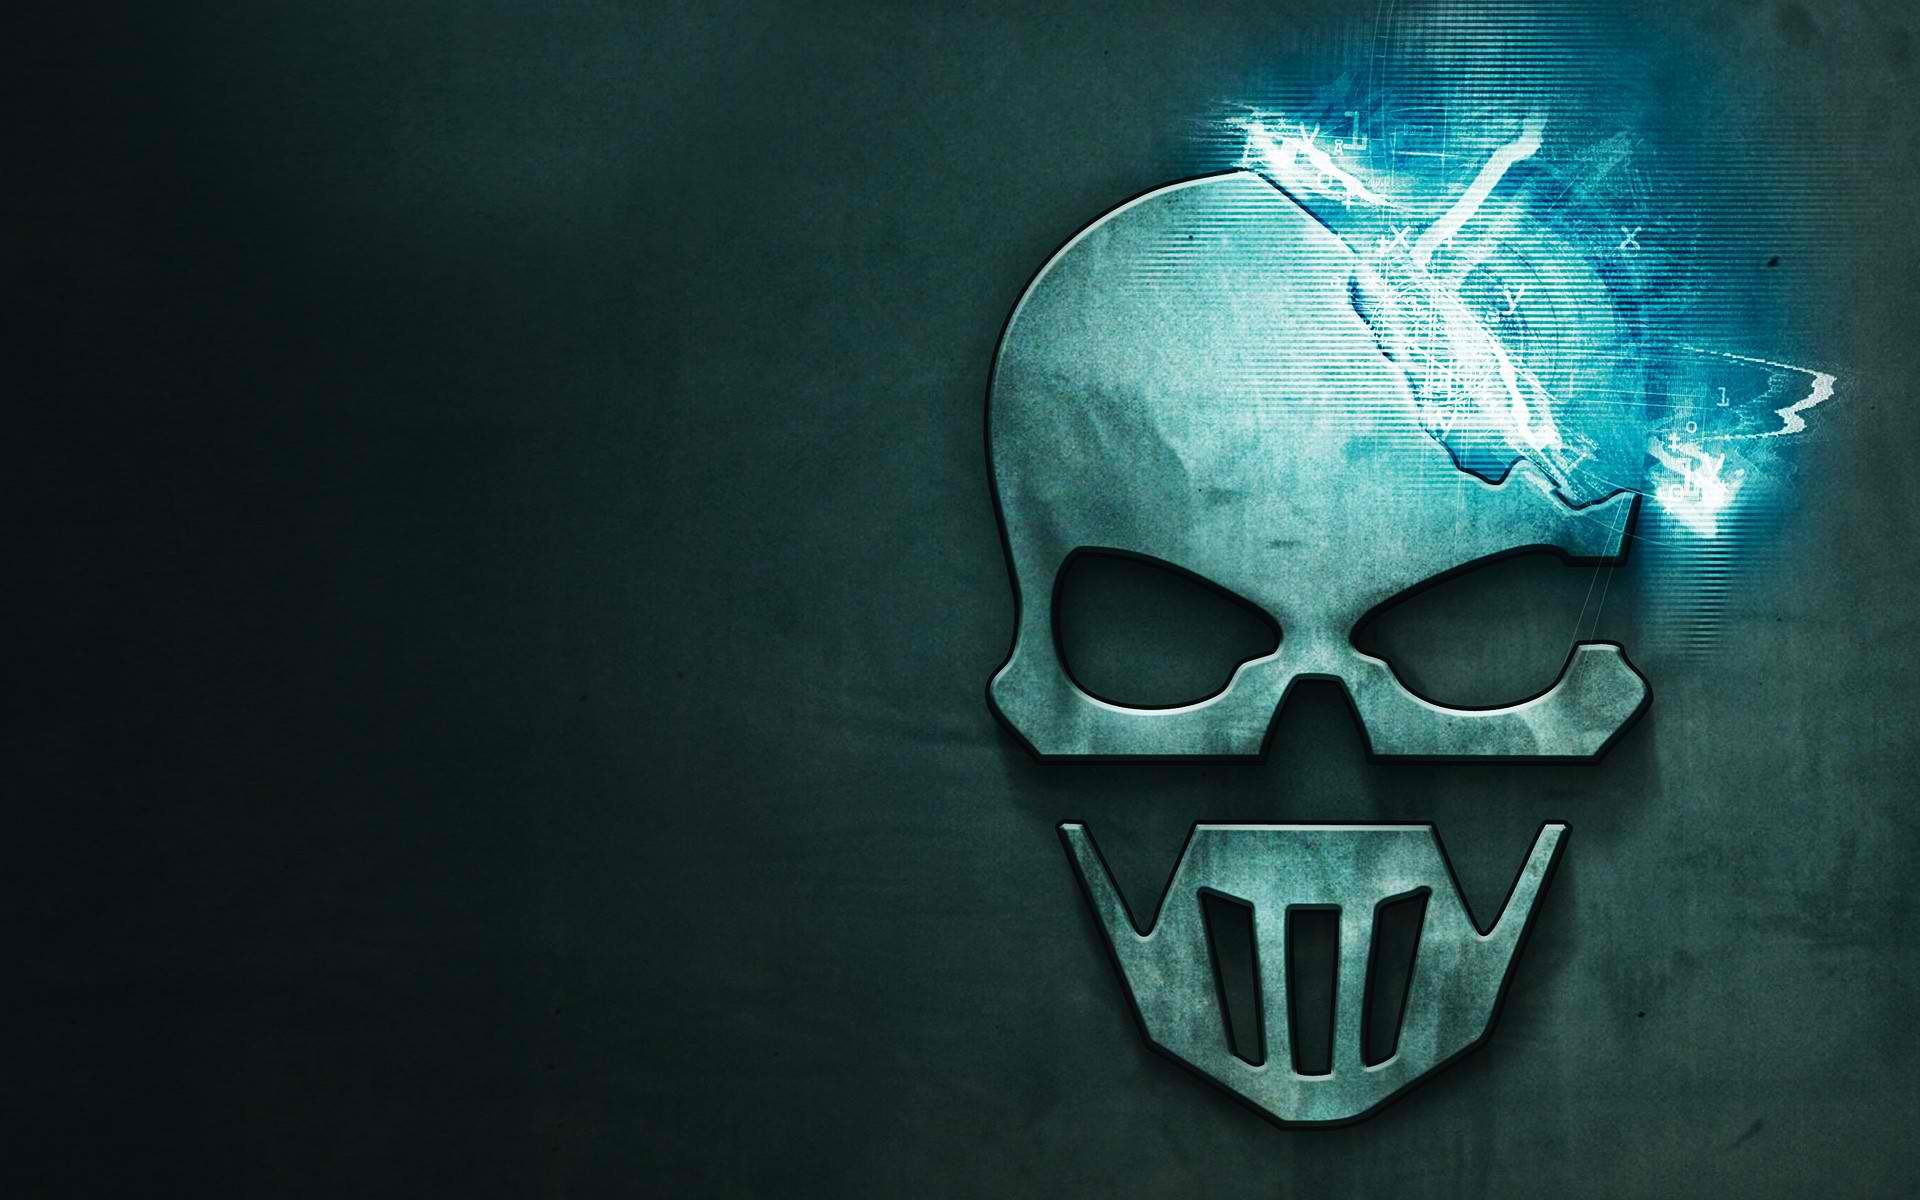 future soldier LOGO Full HD Wallpaper and Background Image | 1920x1200